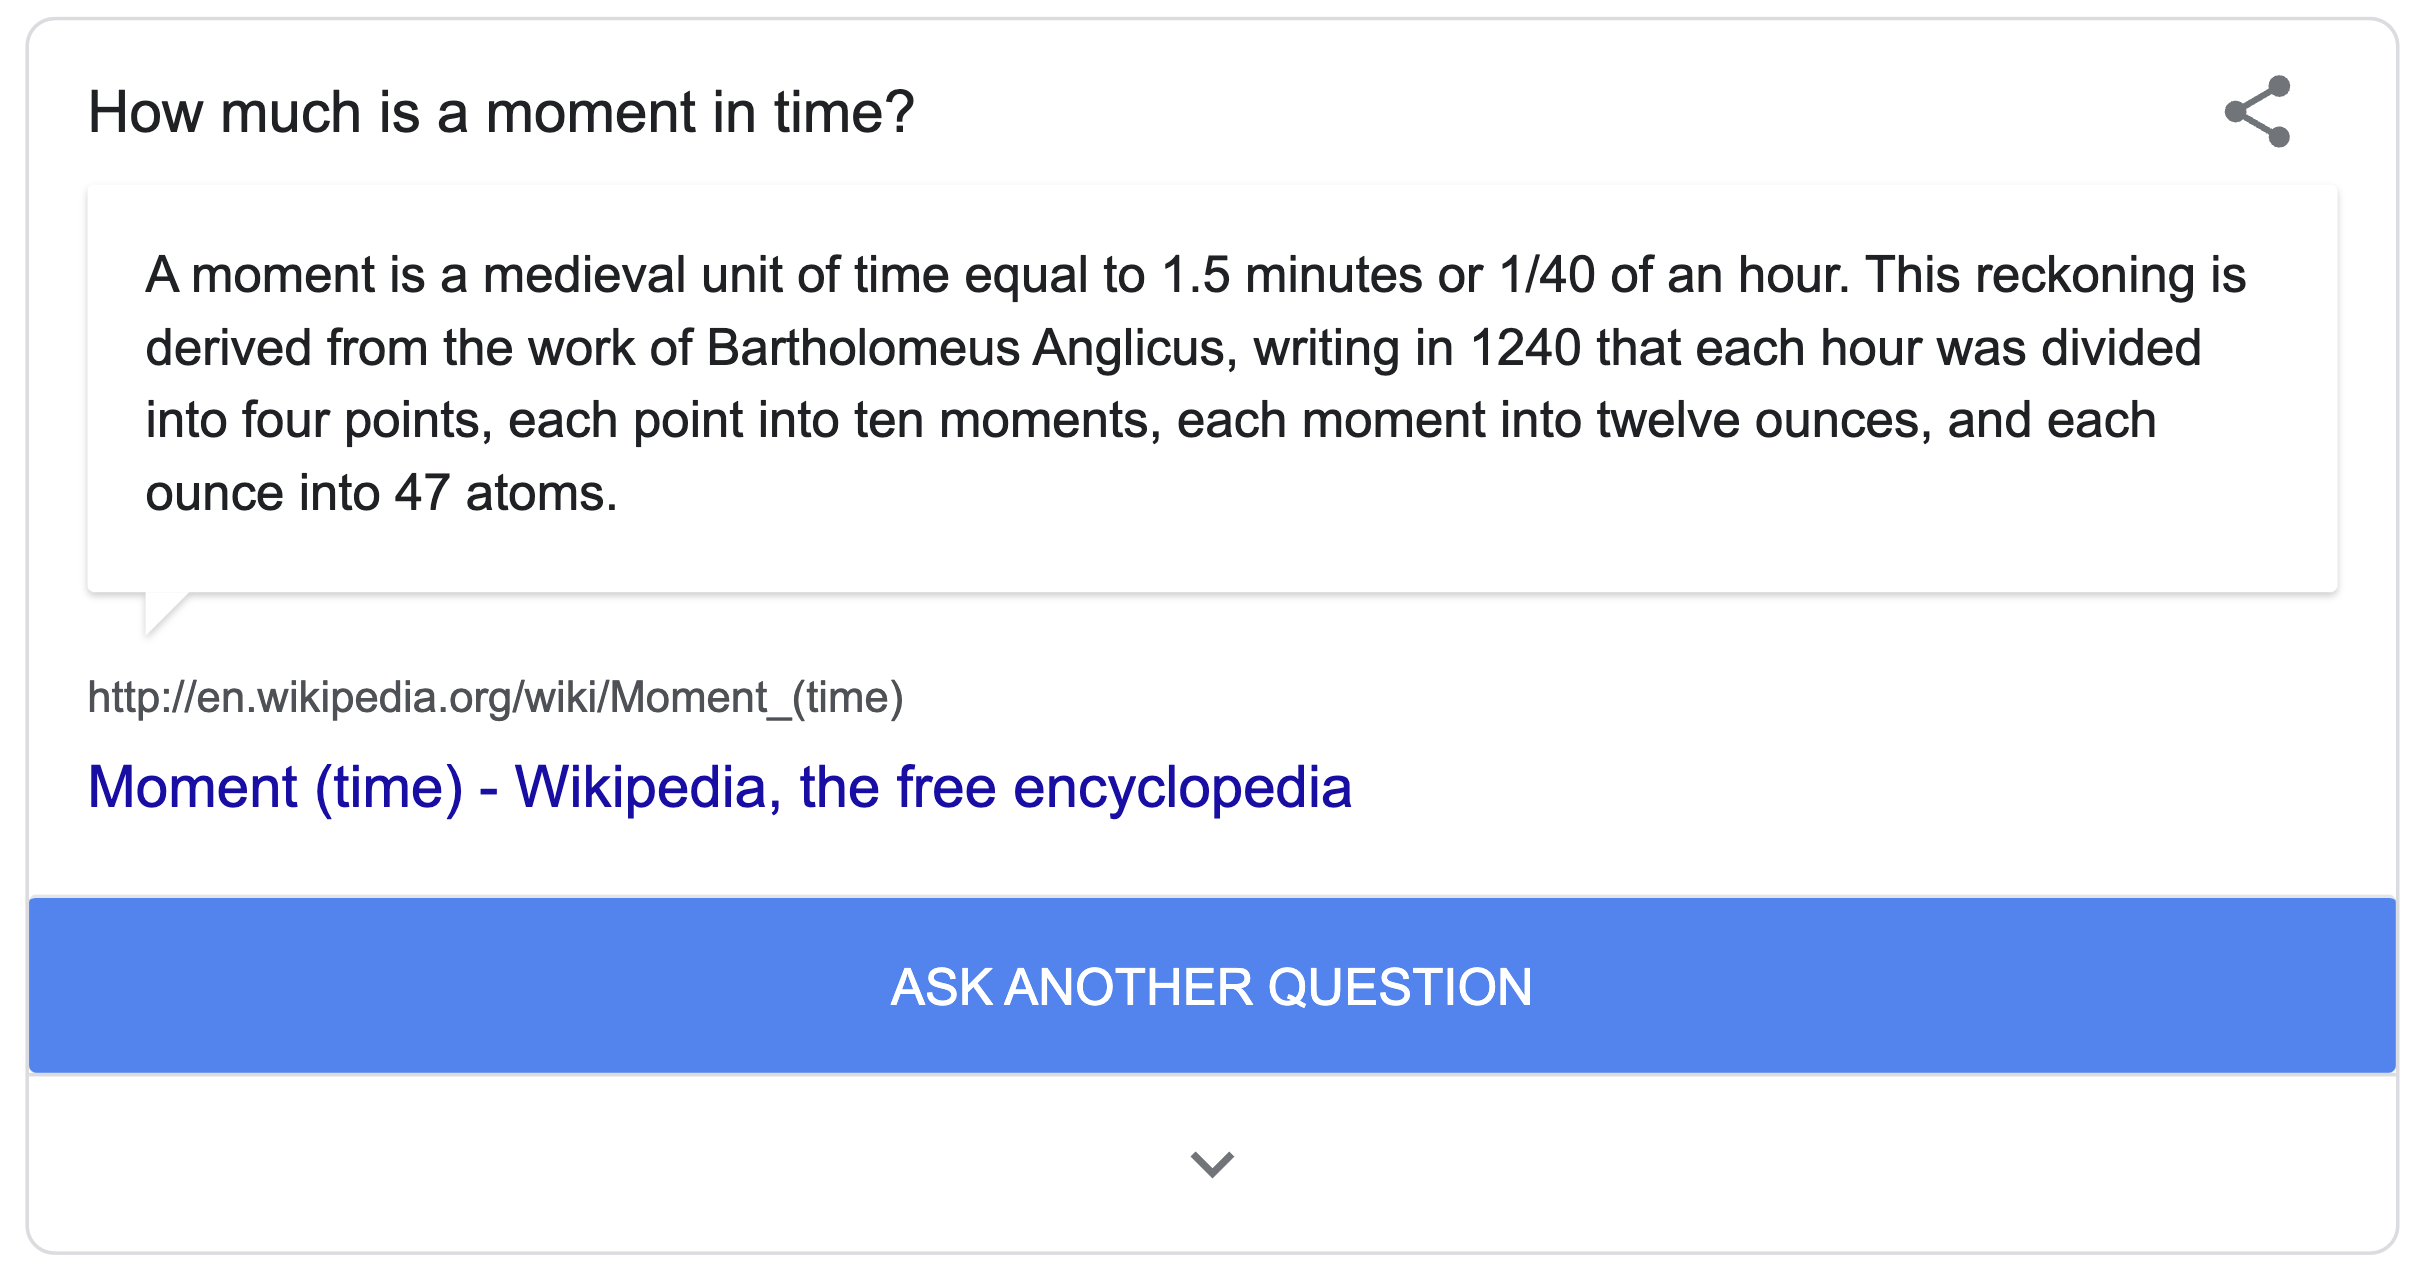 i'm feeling curious: How much is a moment in time?